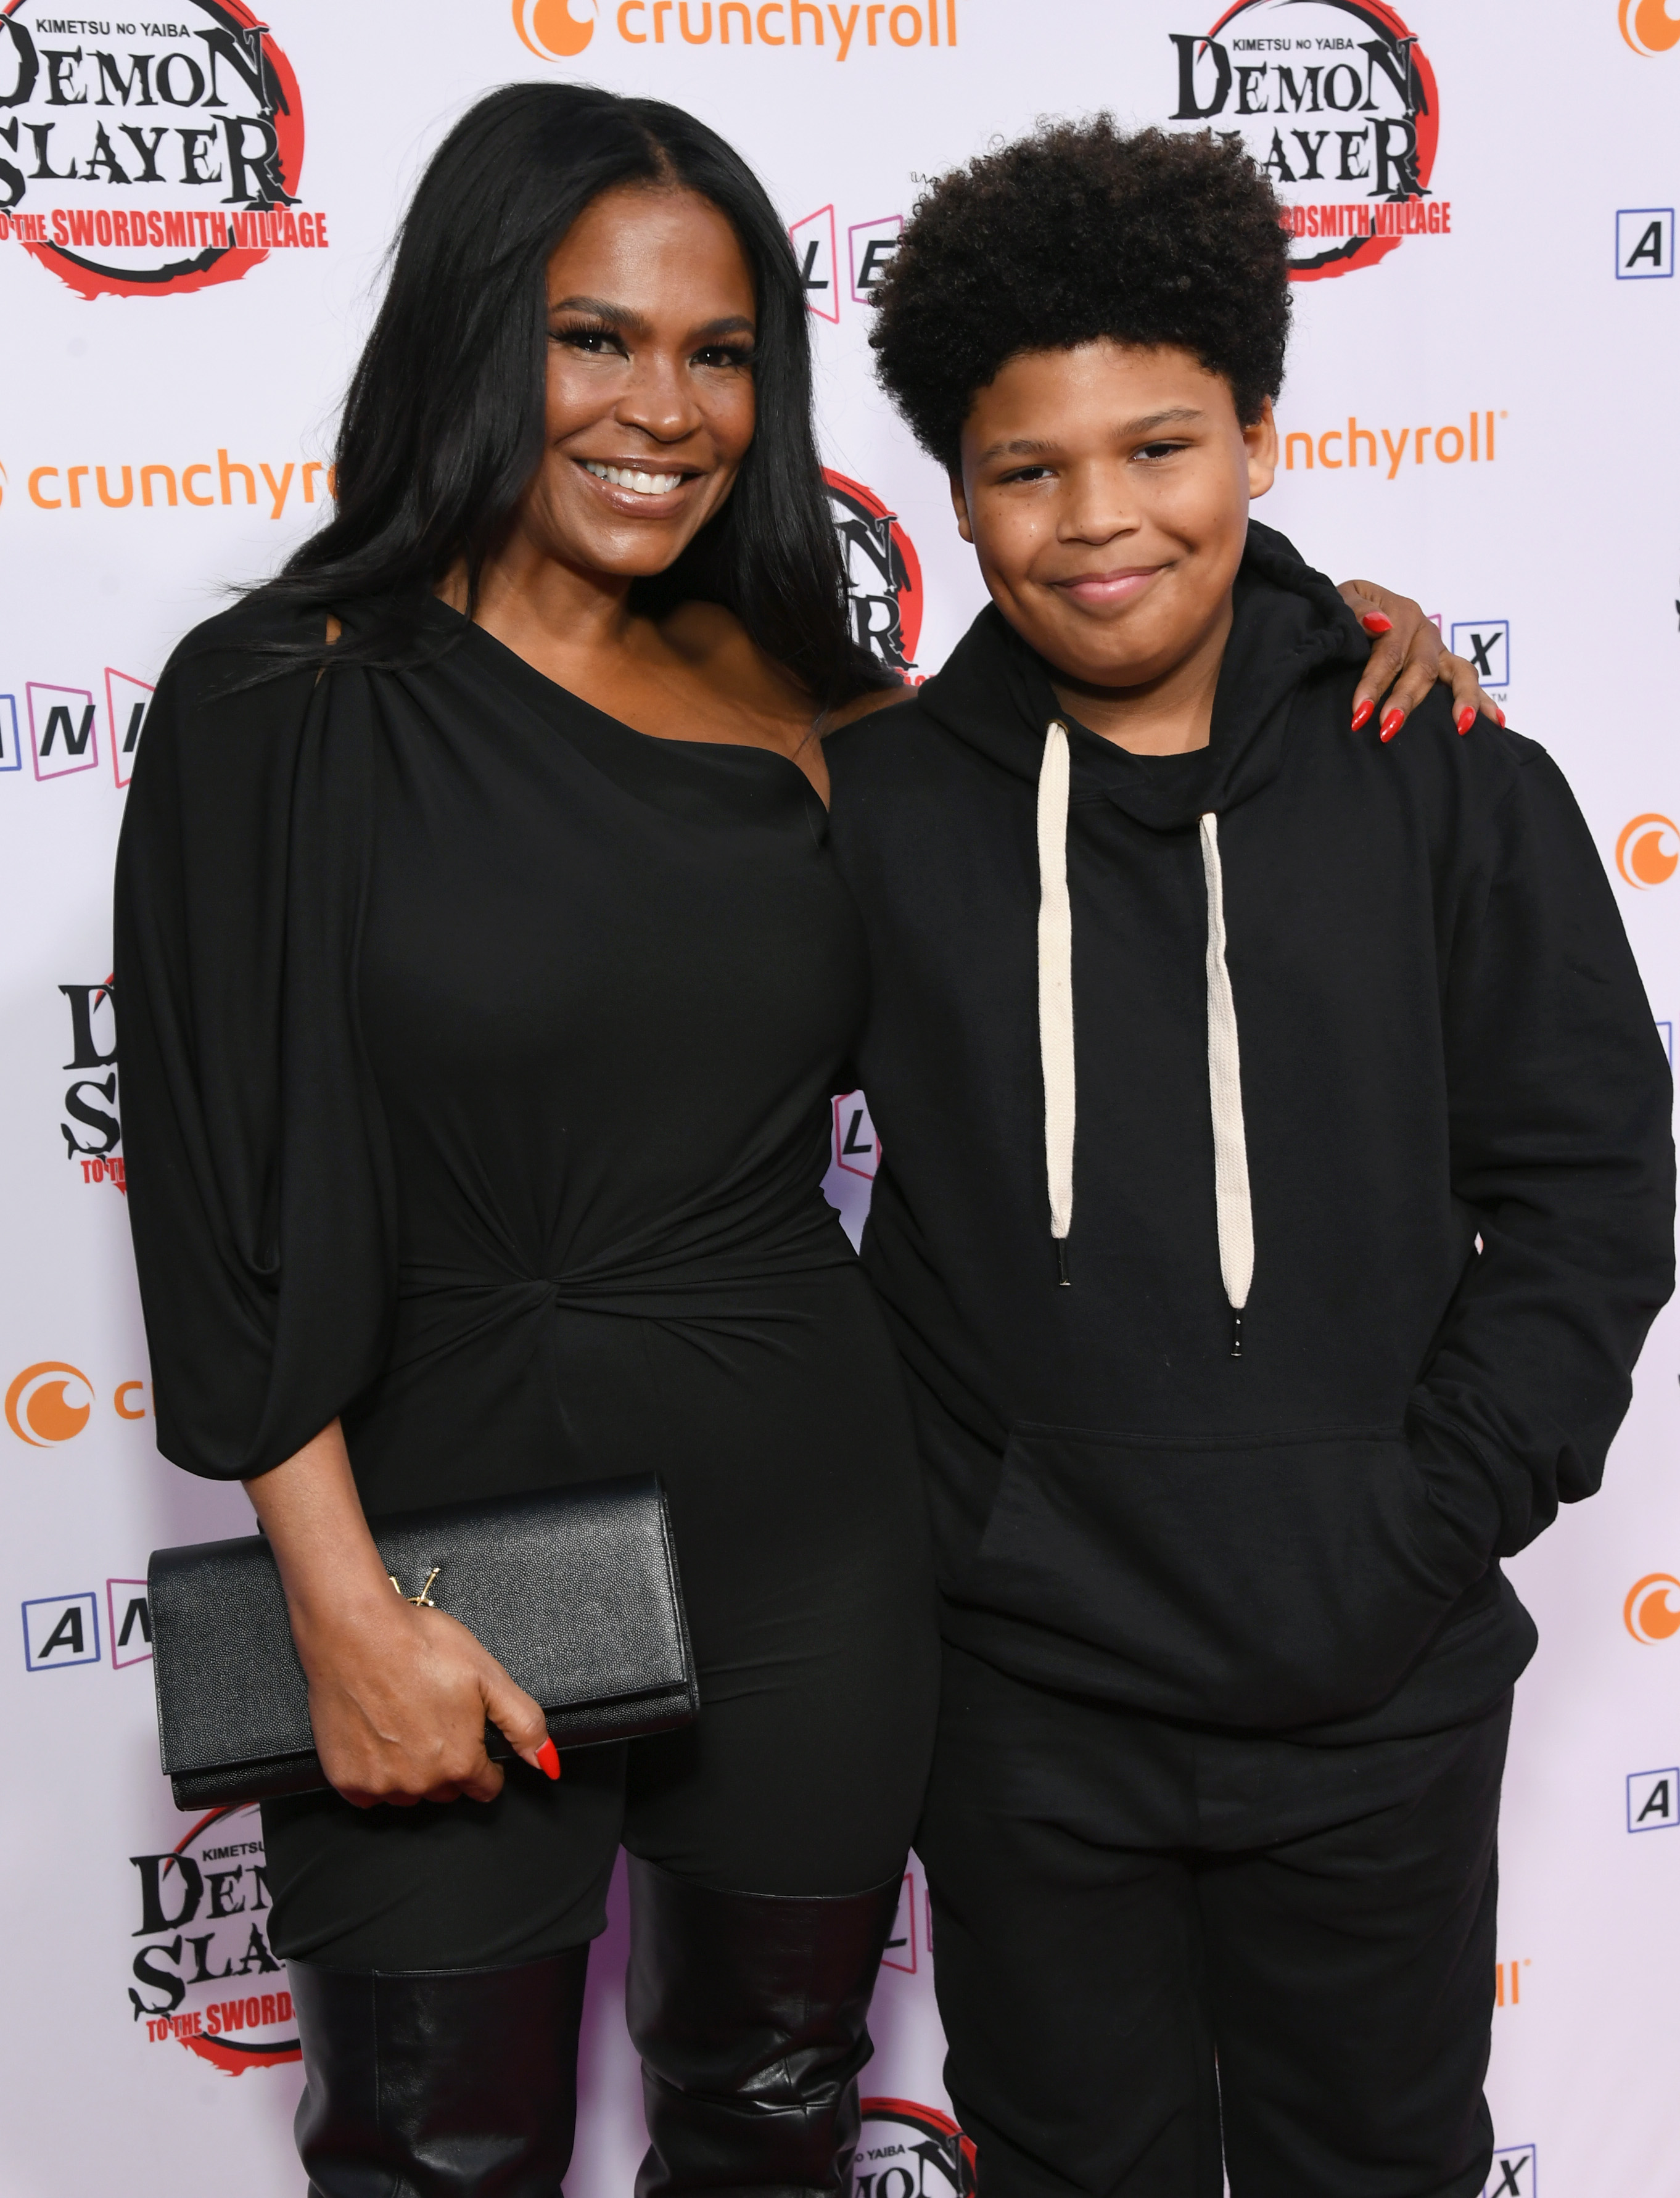 Nia Long and Kez Udoka at the Los Angeles premiere of "Demon Slayer: Kimetsu no Yaiba - To the Swordsmith Village" on February 18, 2023 in Los Angeles, California. | Source: Getty Images